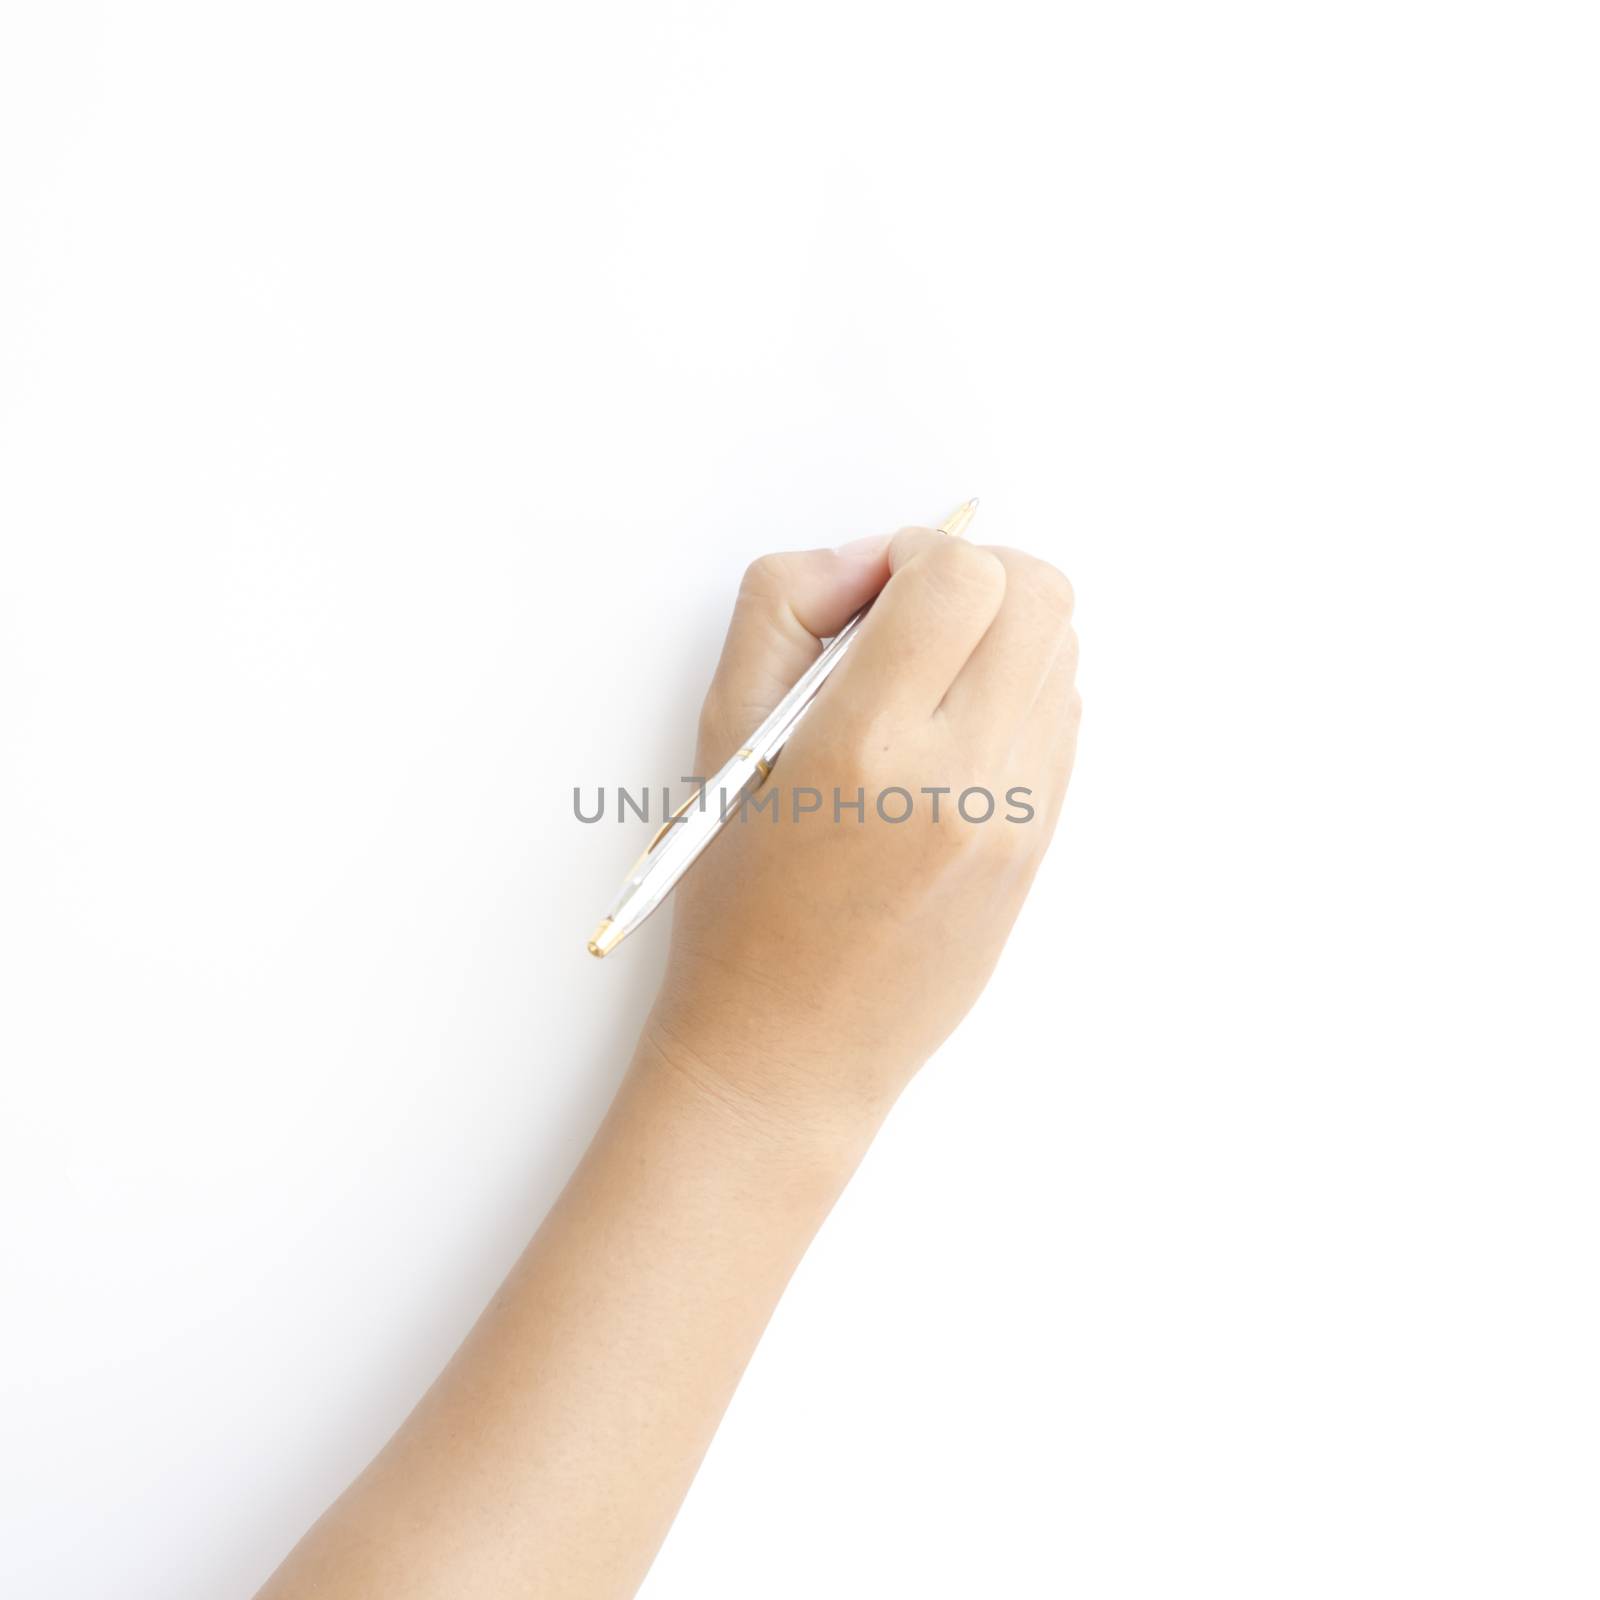 asia woman right hand writing on a white background